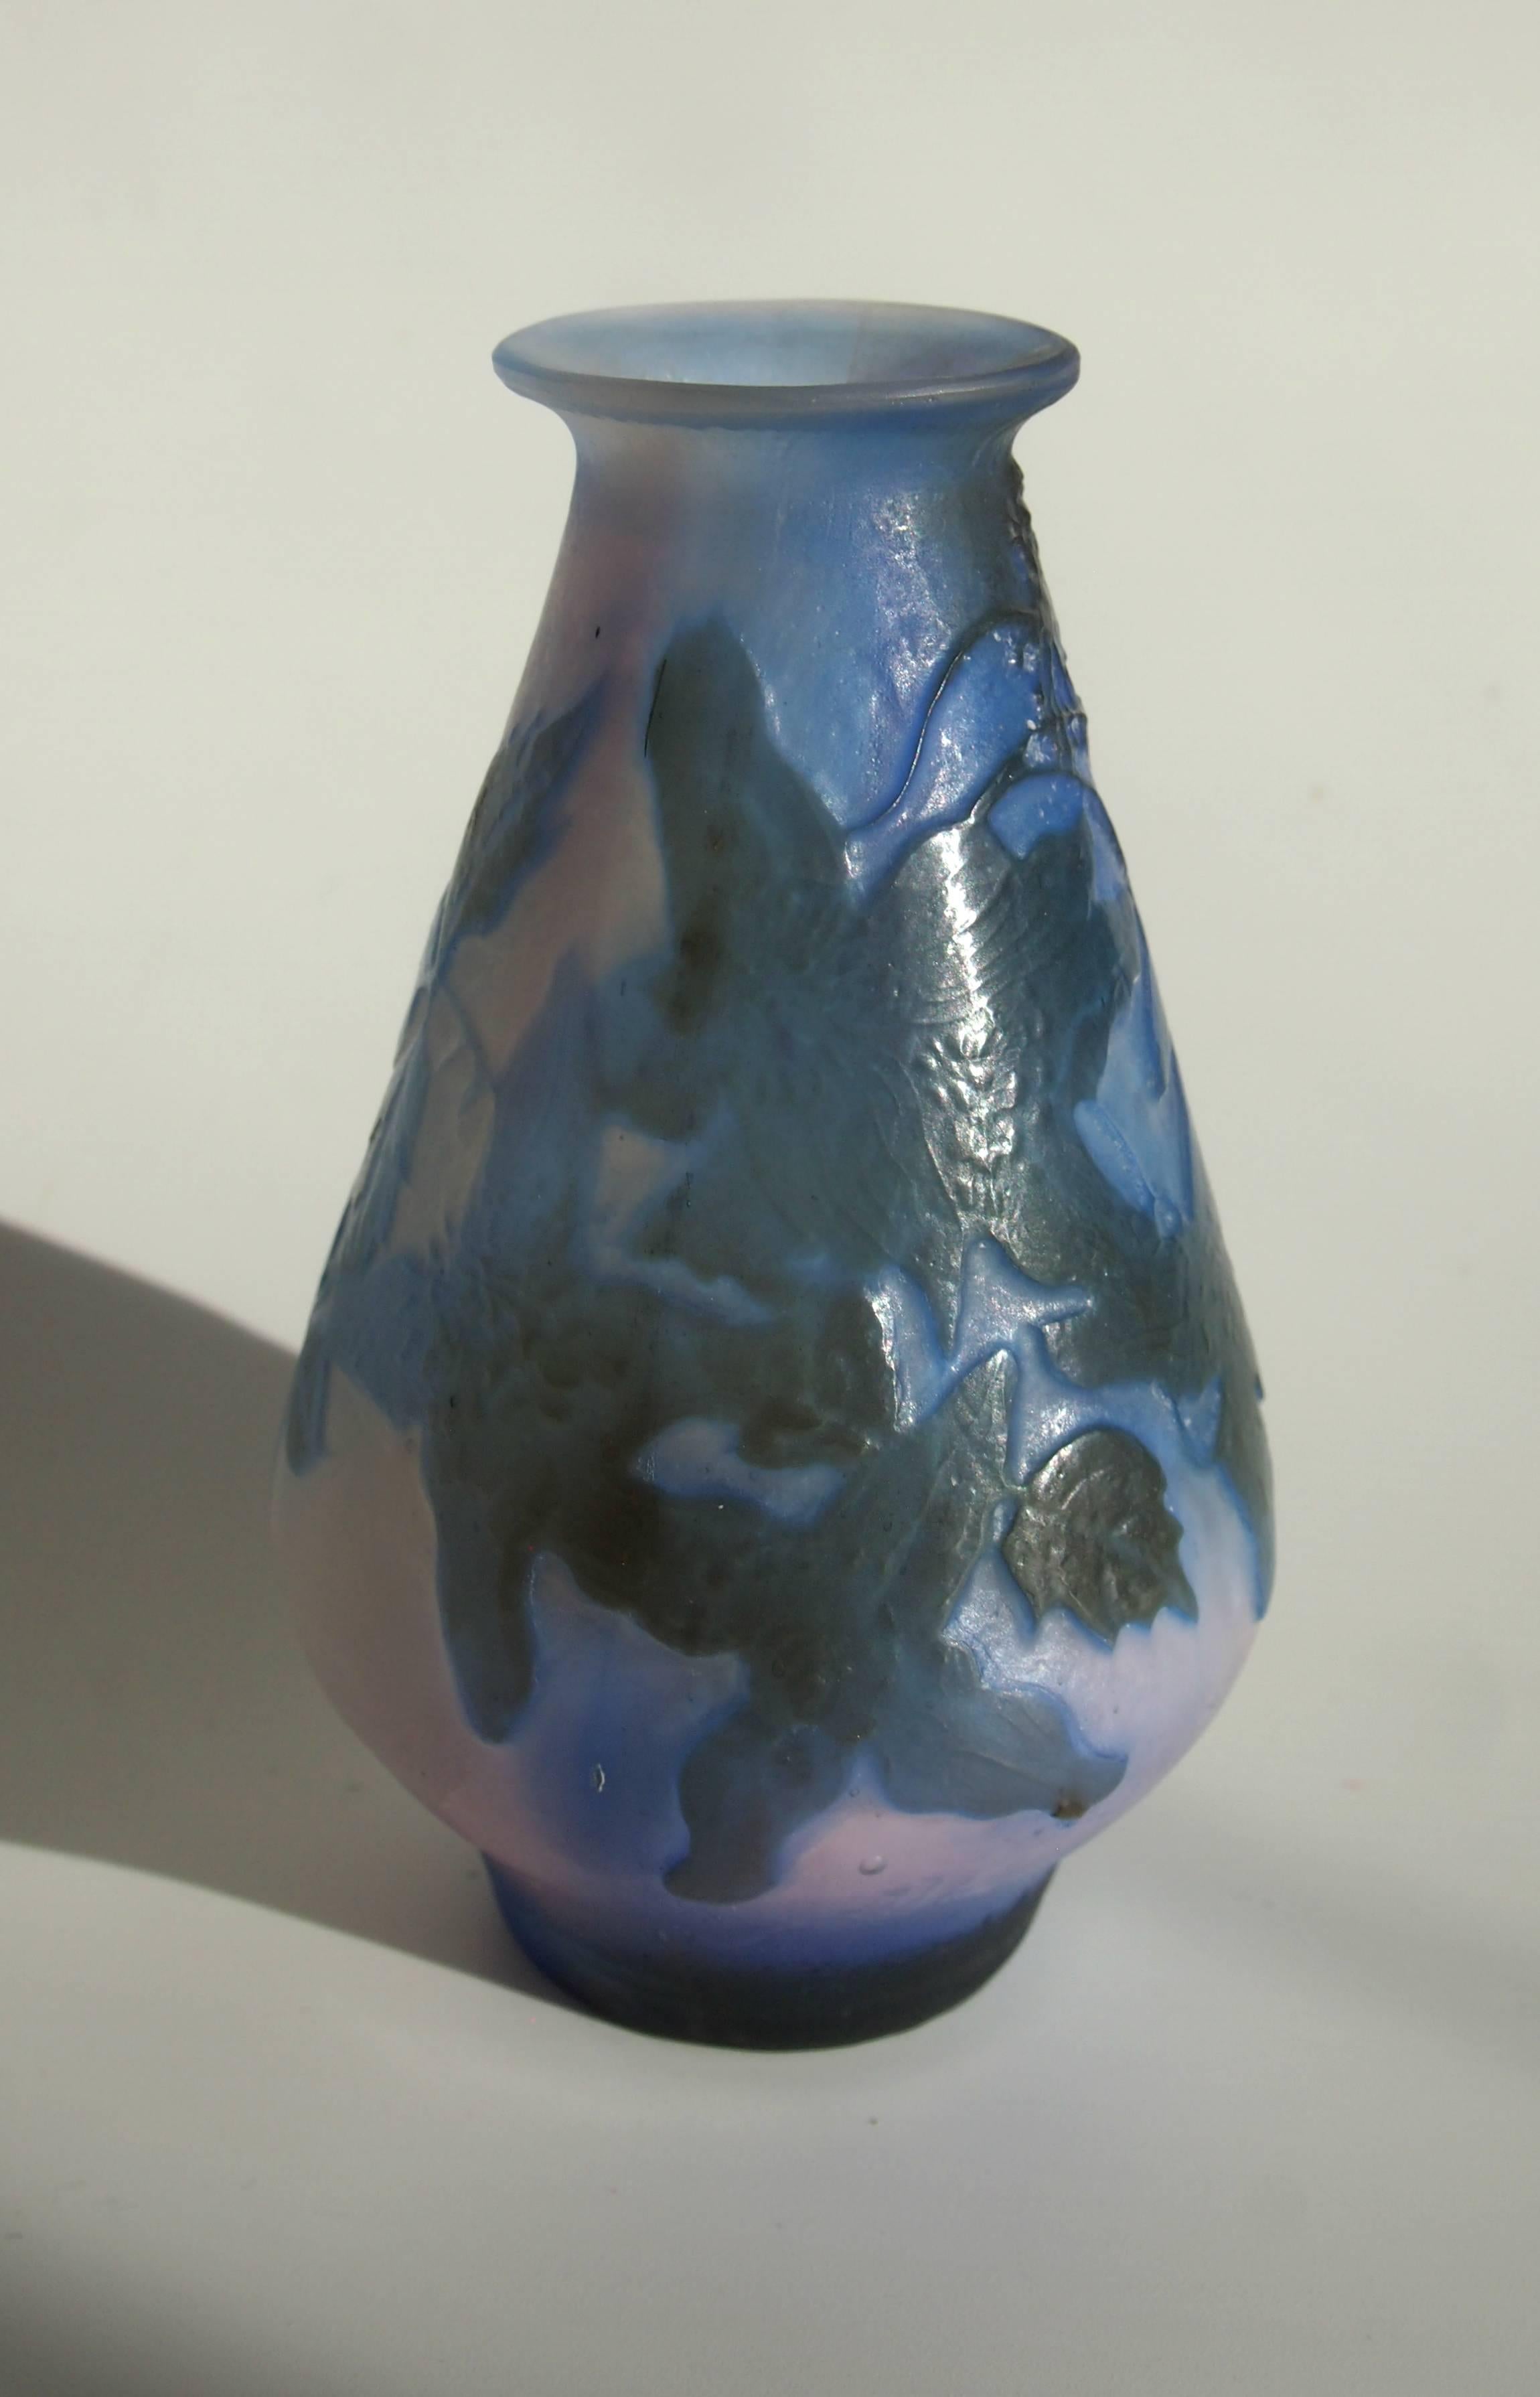 French Art Nouveau Emile Galle Fire Polished Cameo Glass Vase circa 1900 In Good Condition For Sale In London, GB